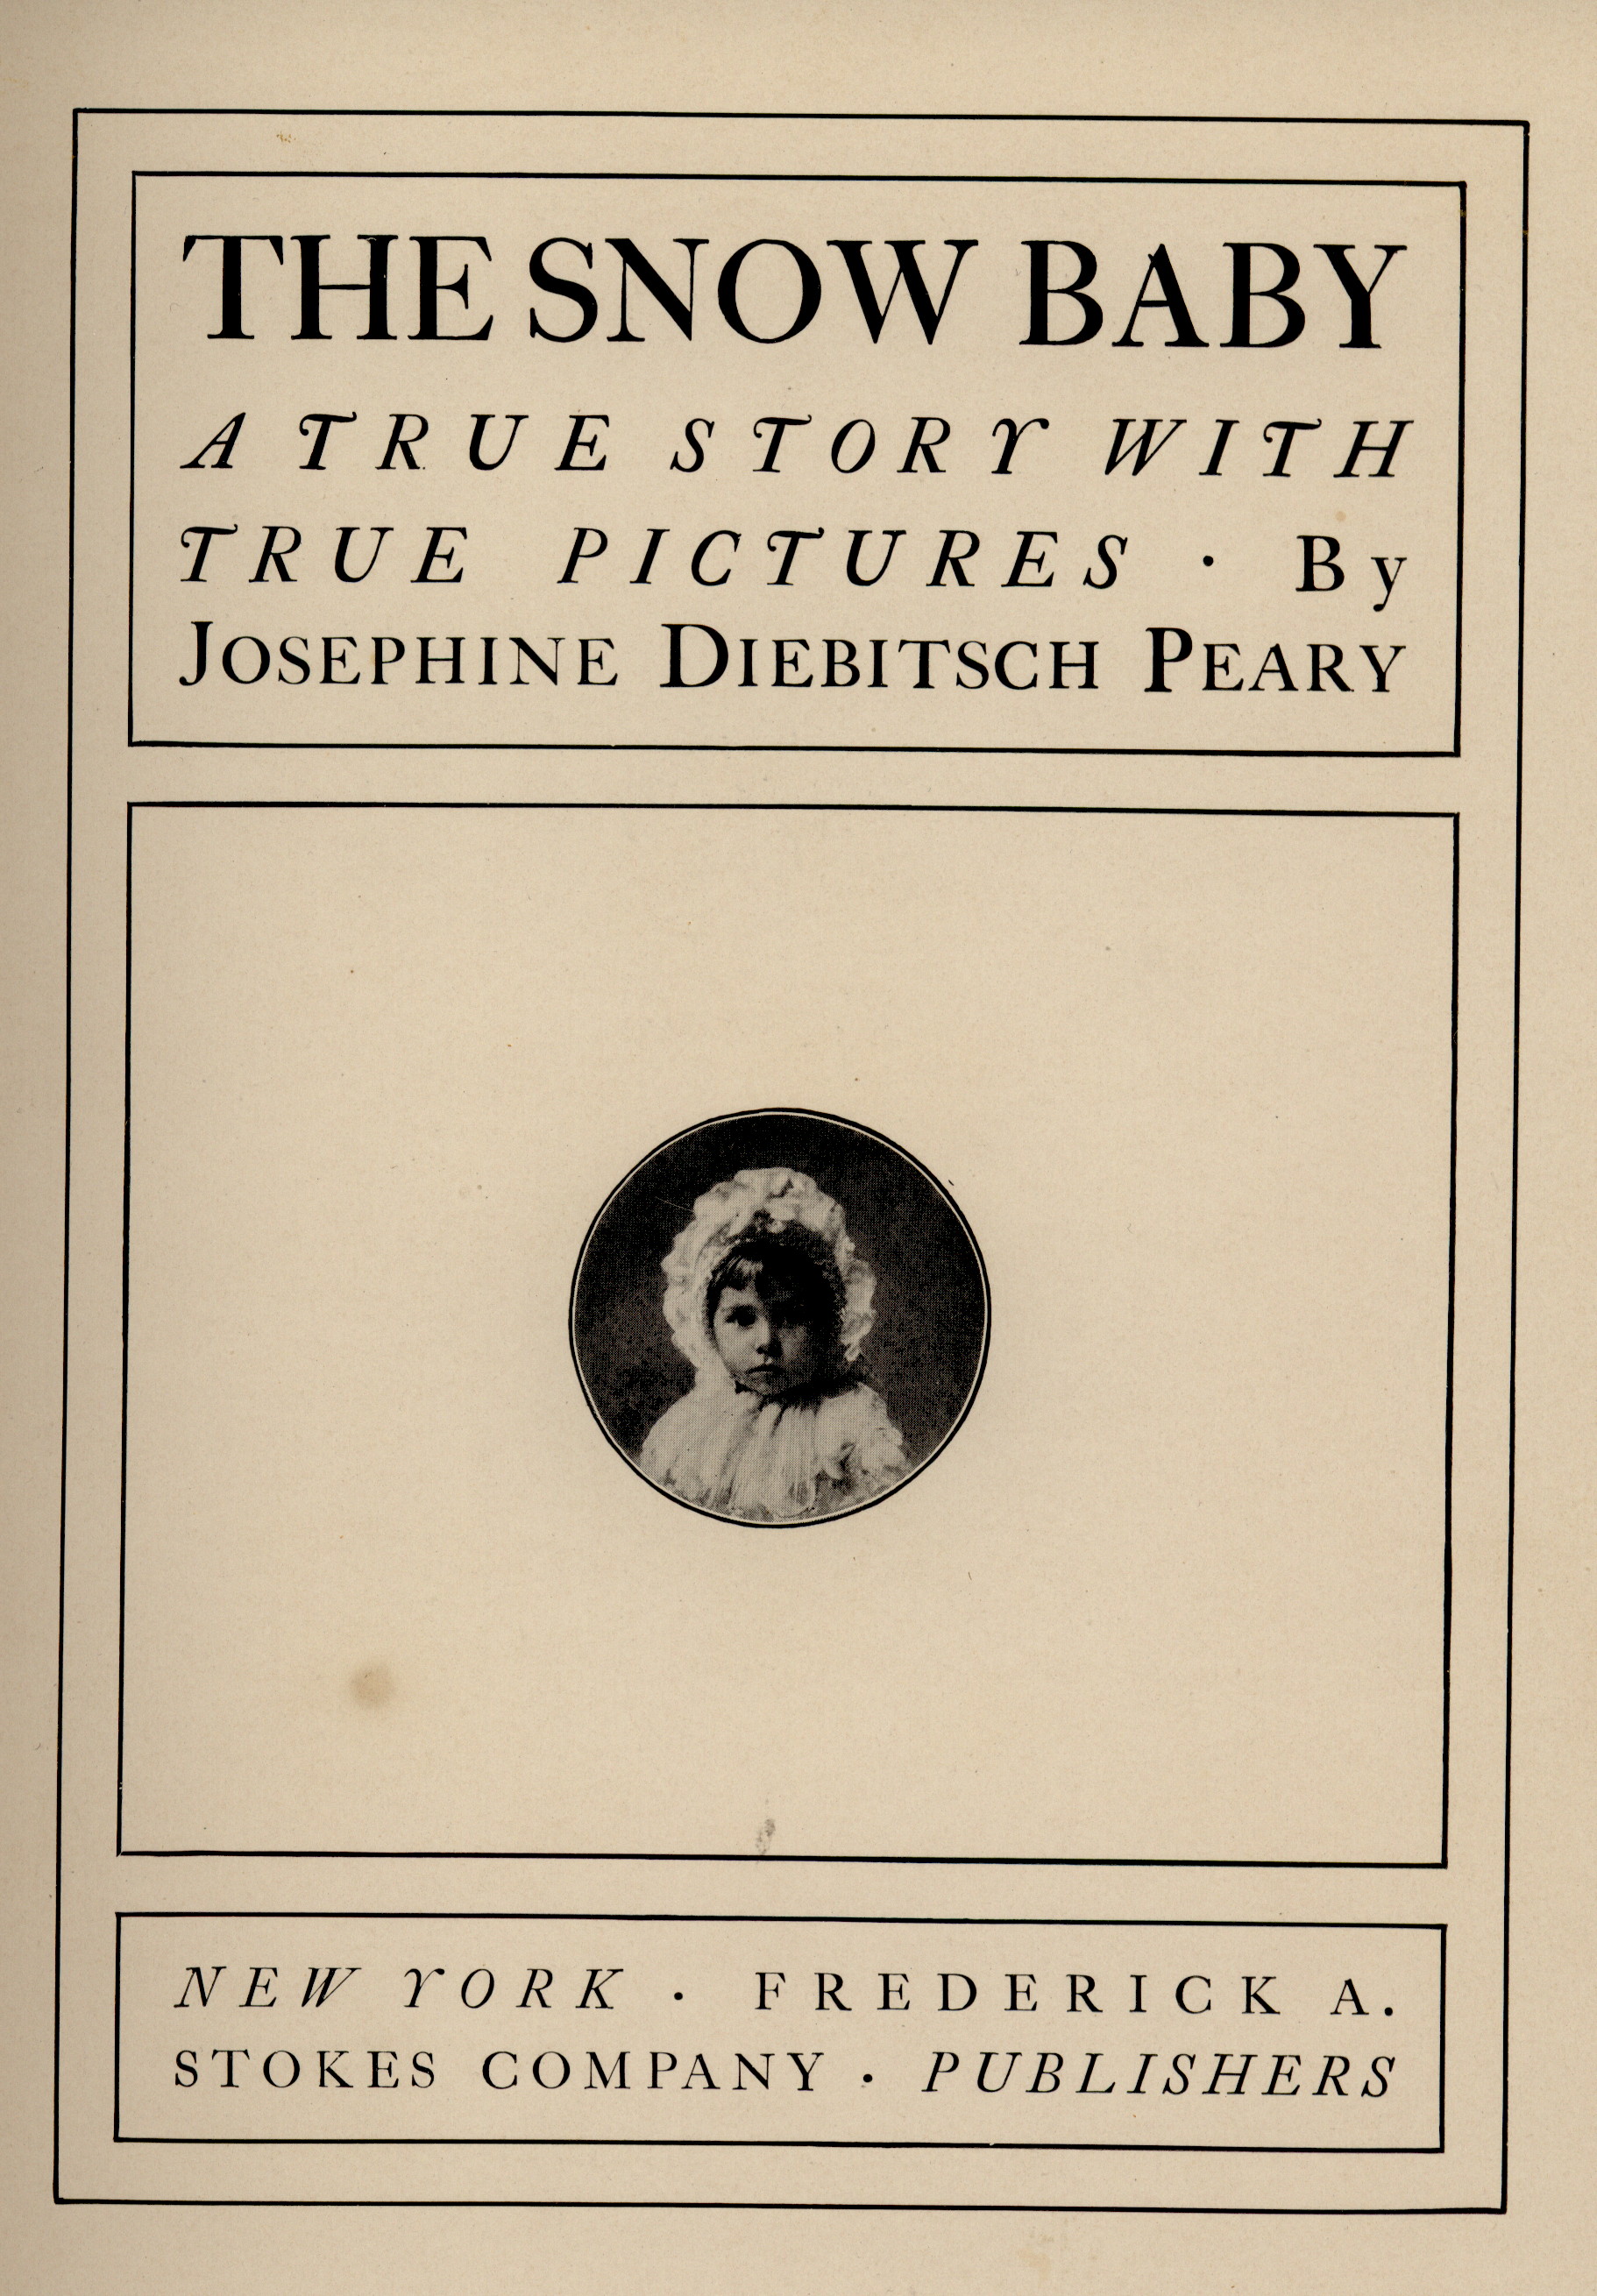 The SNOW BABY  A TRUE STORY WITH TRUE PICTURES BY JOSEPHINE DIEBITSCH PEARY